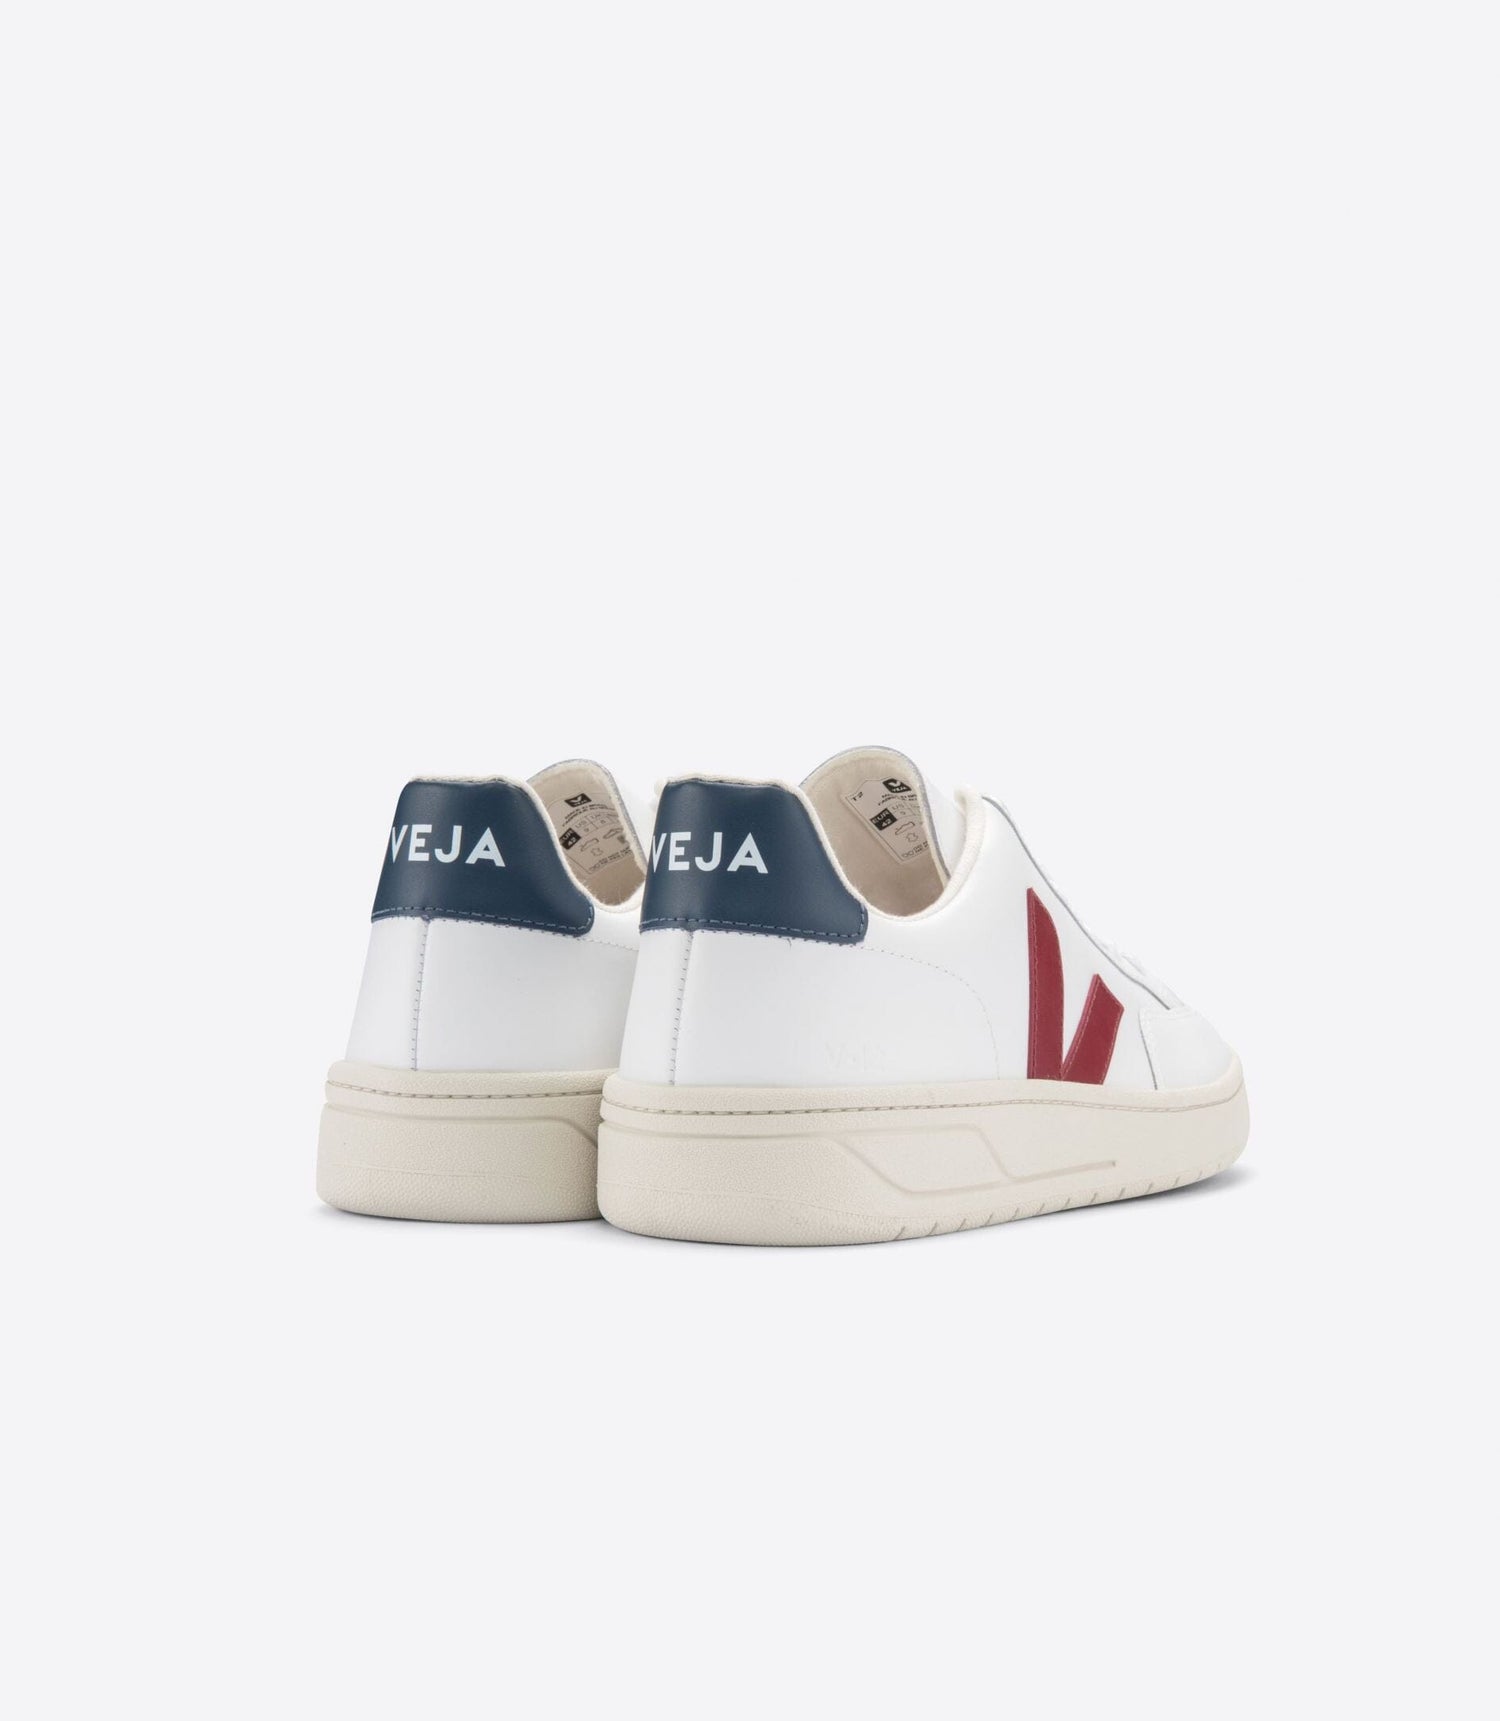 Veja M's V-12 Leather - Classical Sneakers White Marsala Nautico Shoes